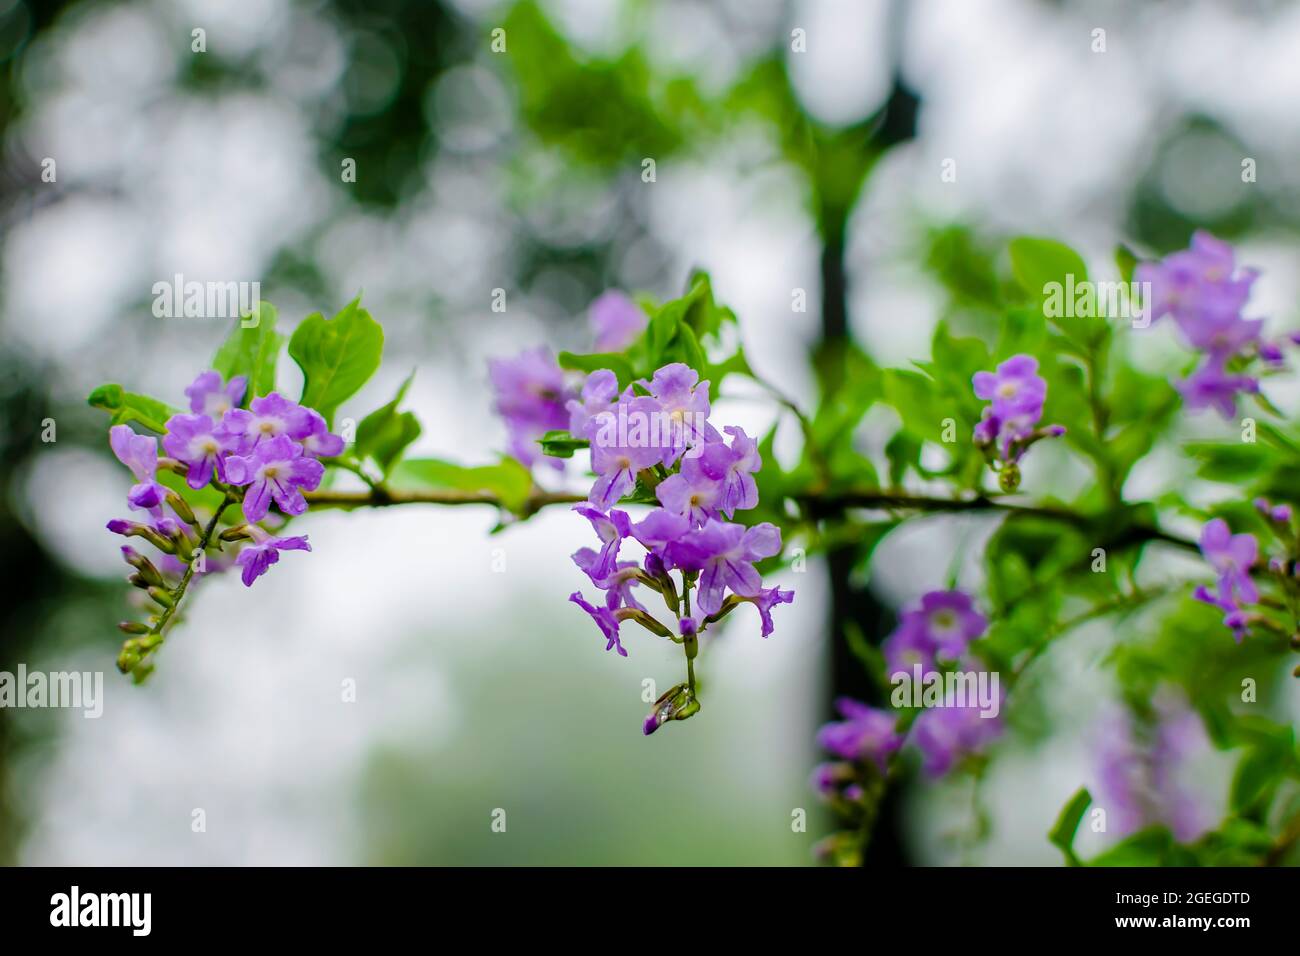 Duranta erecta plant flowers of purple color with twig during rainy season. Used selective focus with bokeh background. Stock Photo